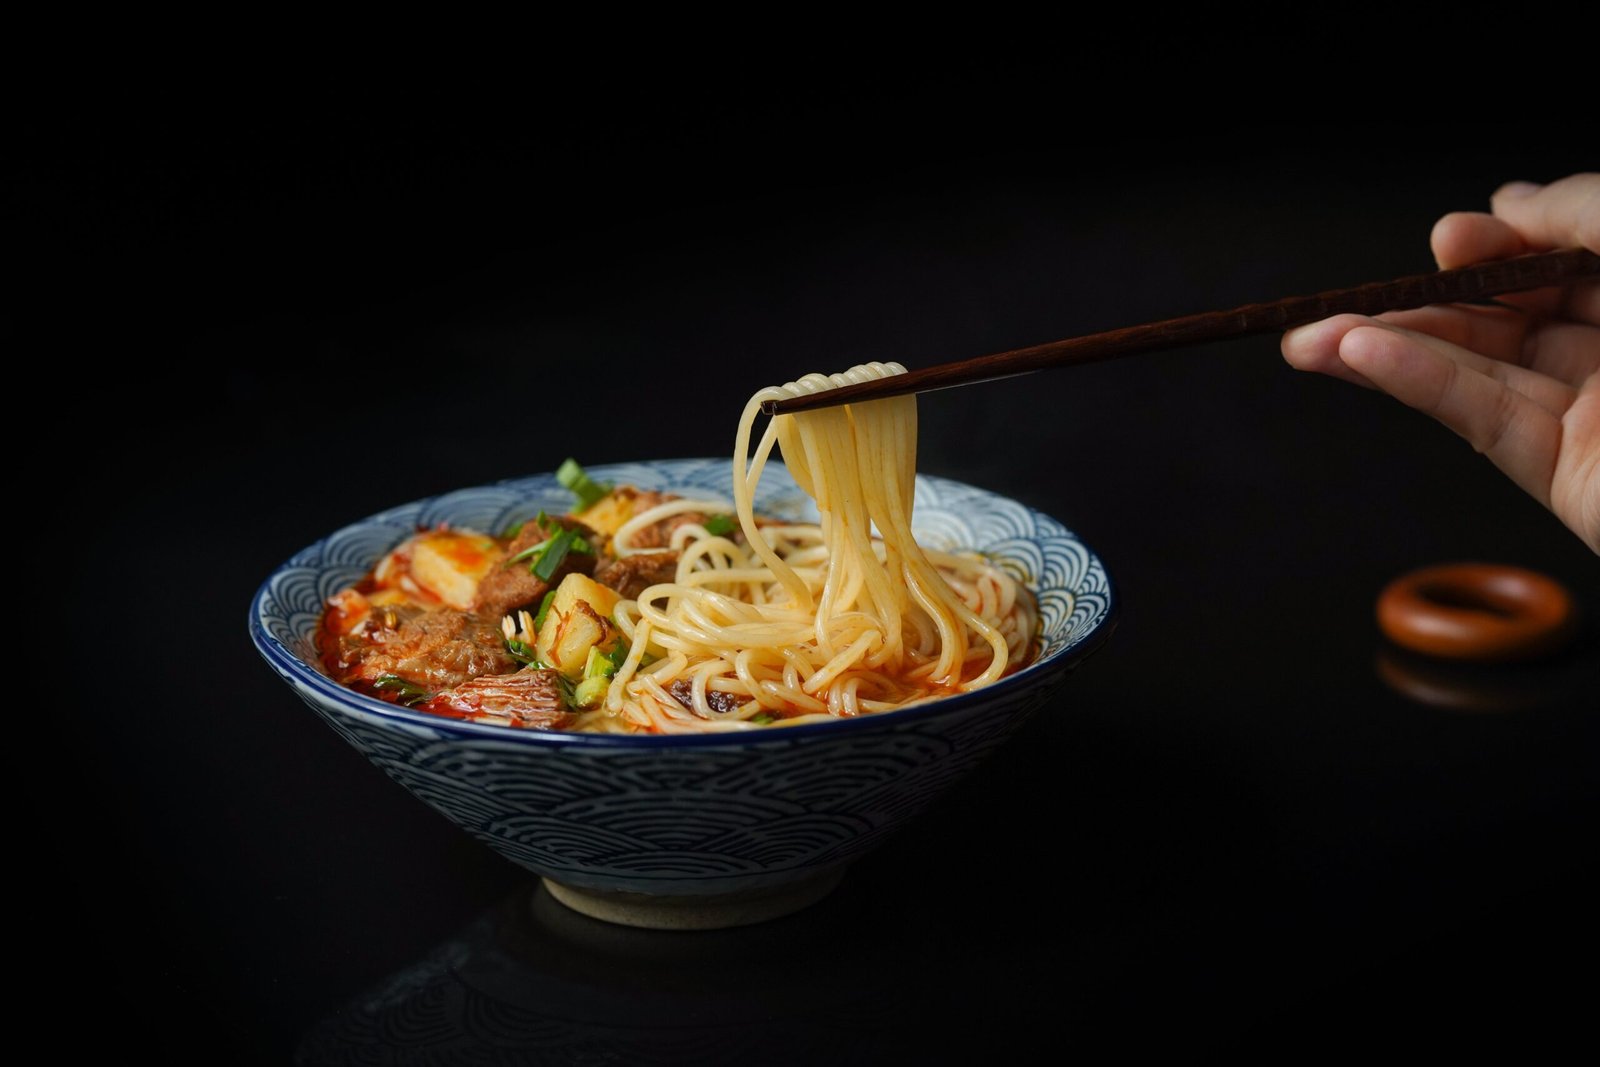 Can You Recommend Innovative Ways To Prepare And Present Korean Noodle Dishes?